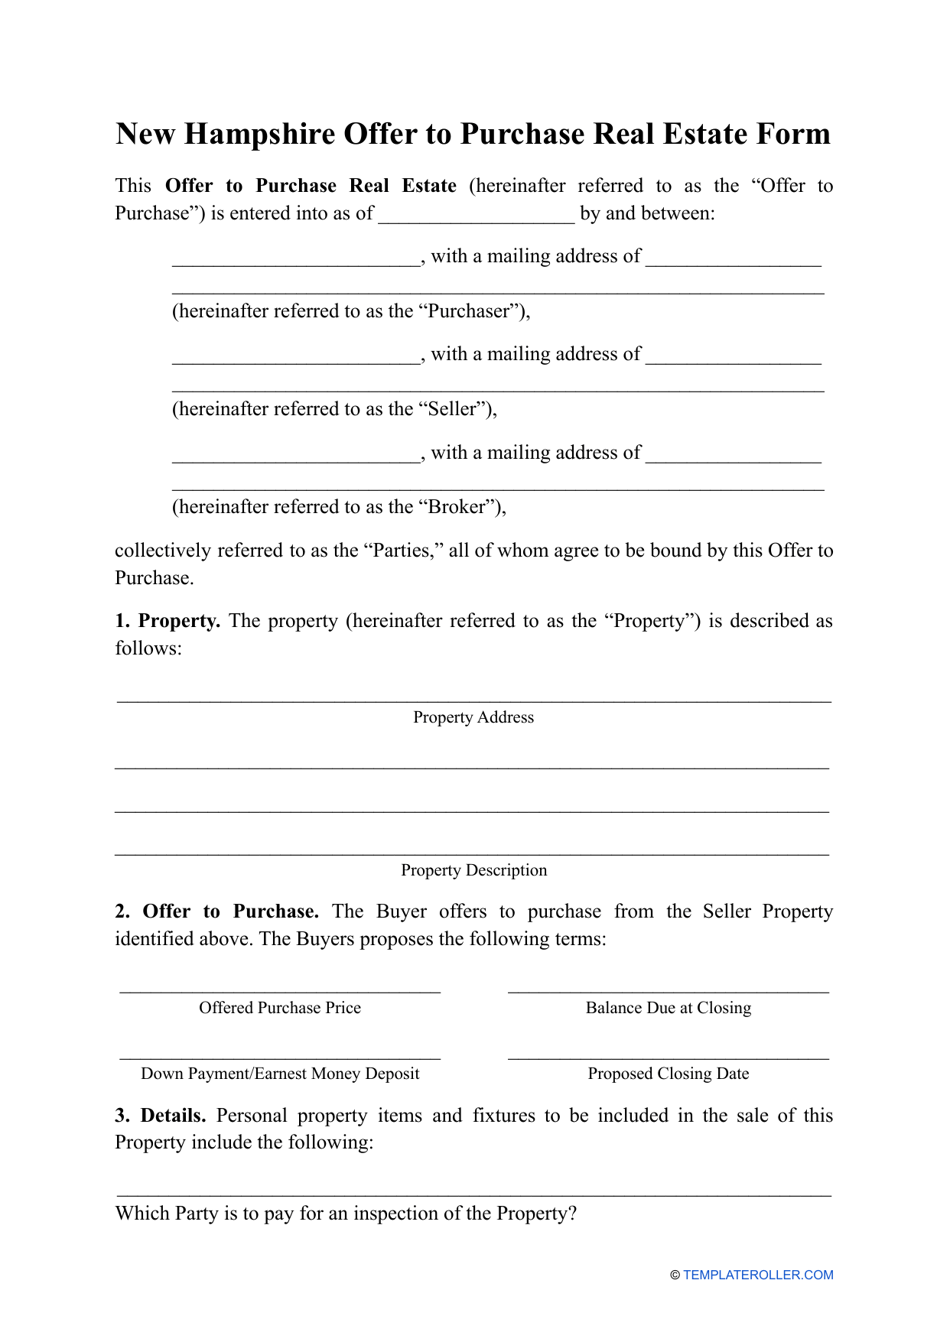 Offer to Purchase Real Estate Form - New Hampshire, Page 1